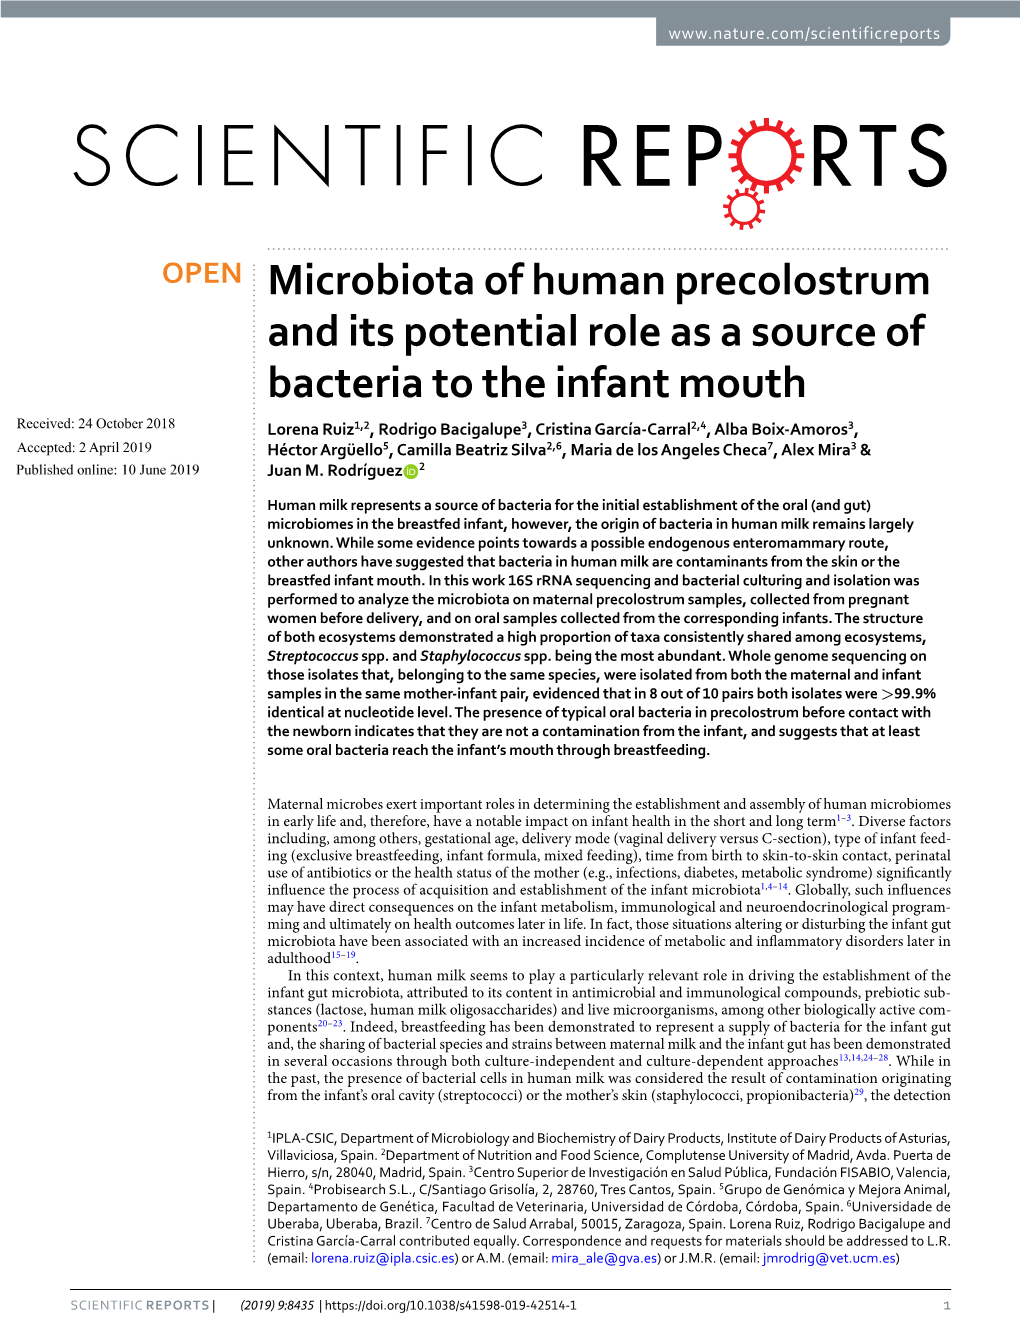 Microbiota of Human Precolostrum and Its Potential Role As a Source Of